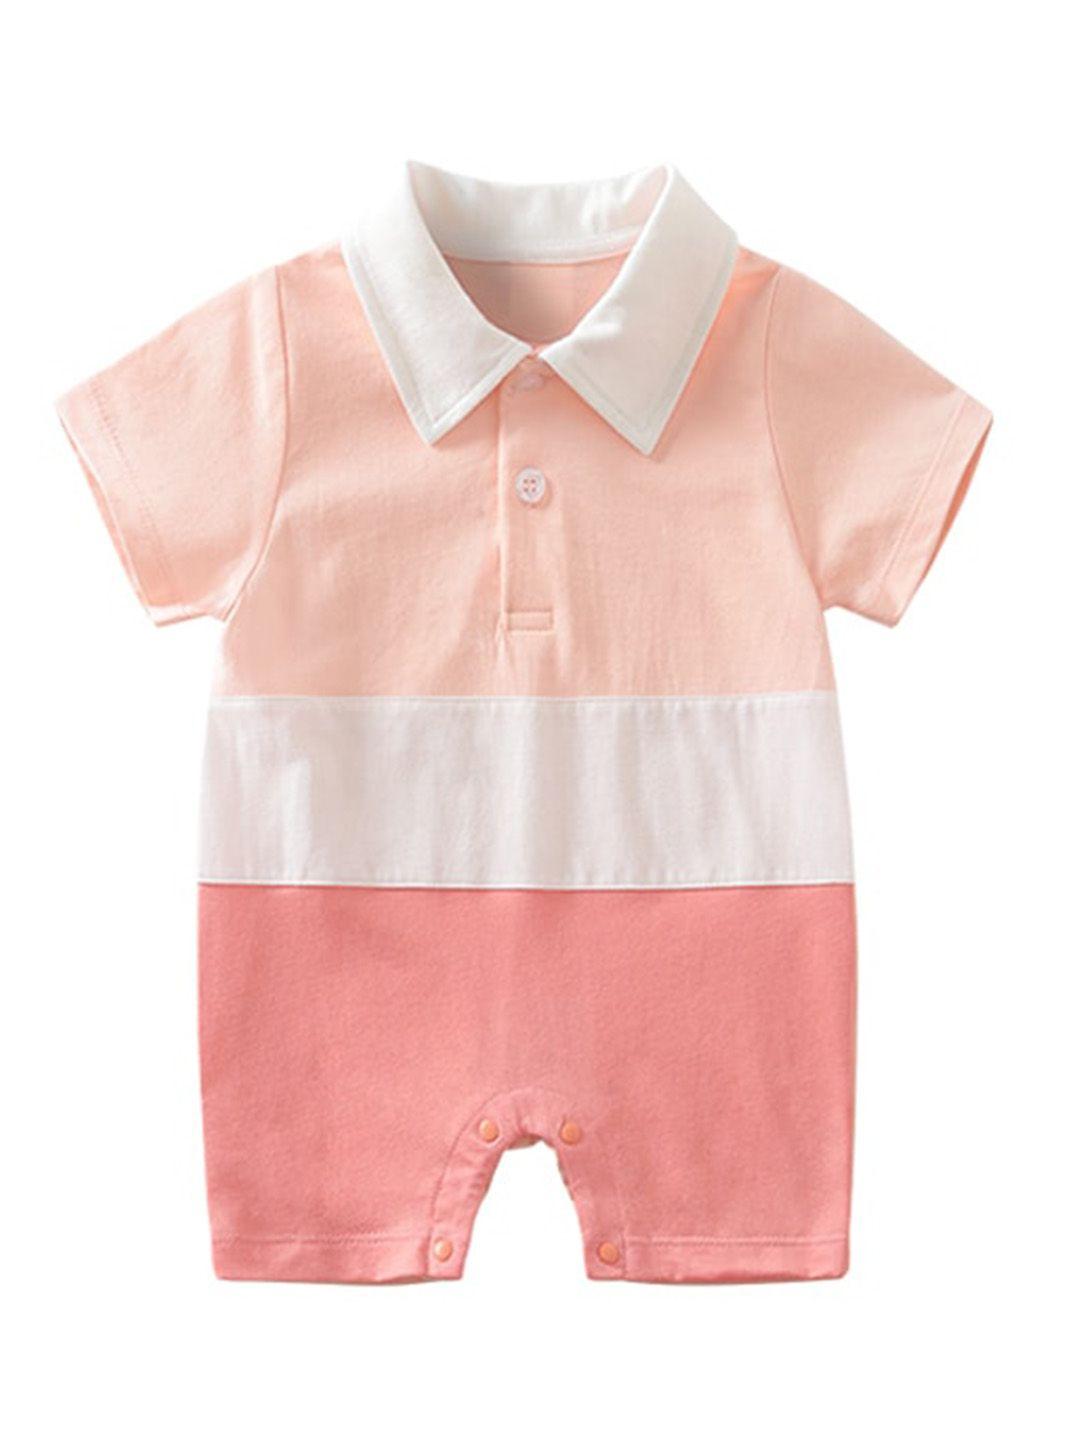 stylecast-infant-girls-pink-colourblocked-cotton-rompers